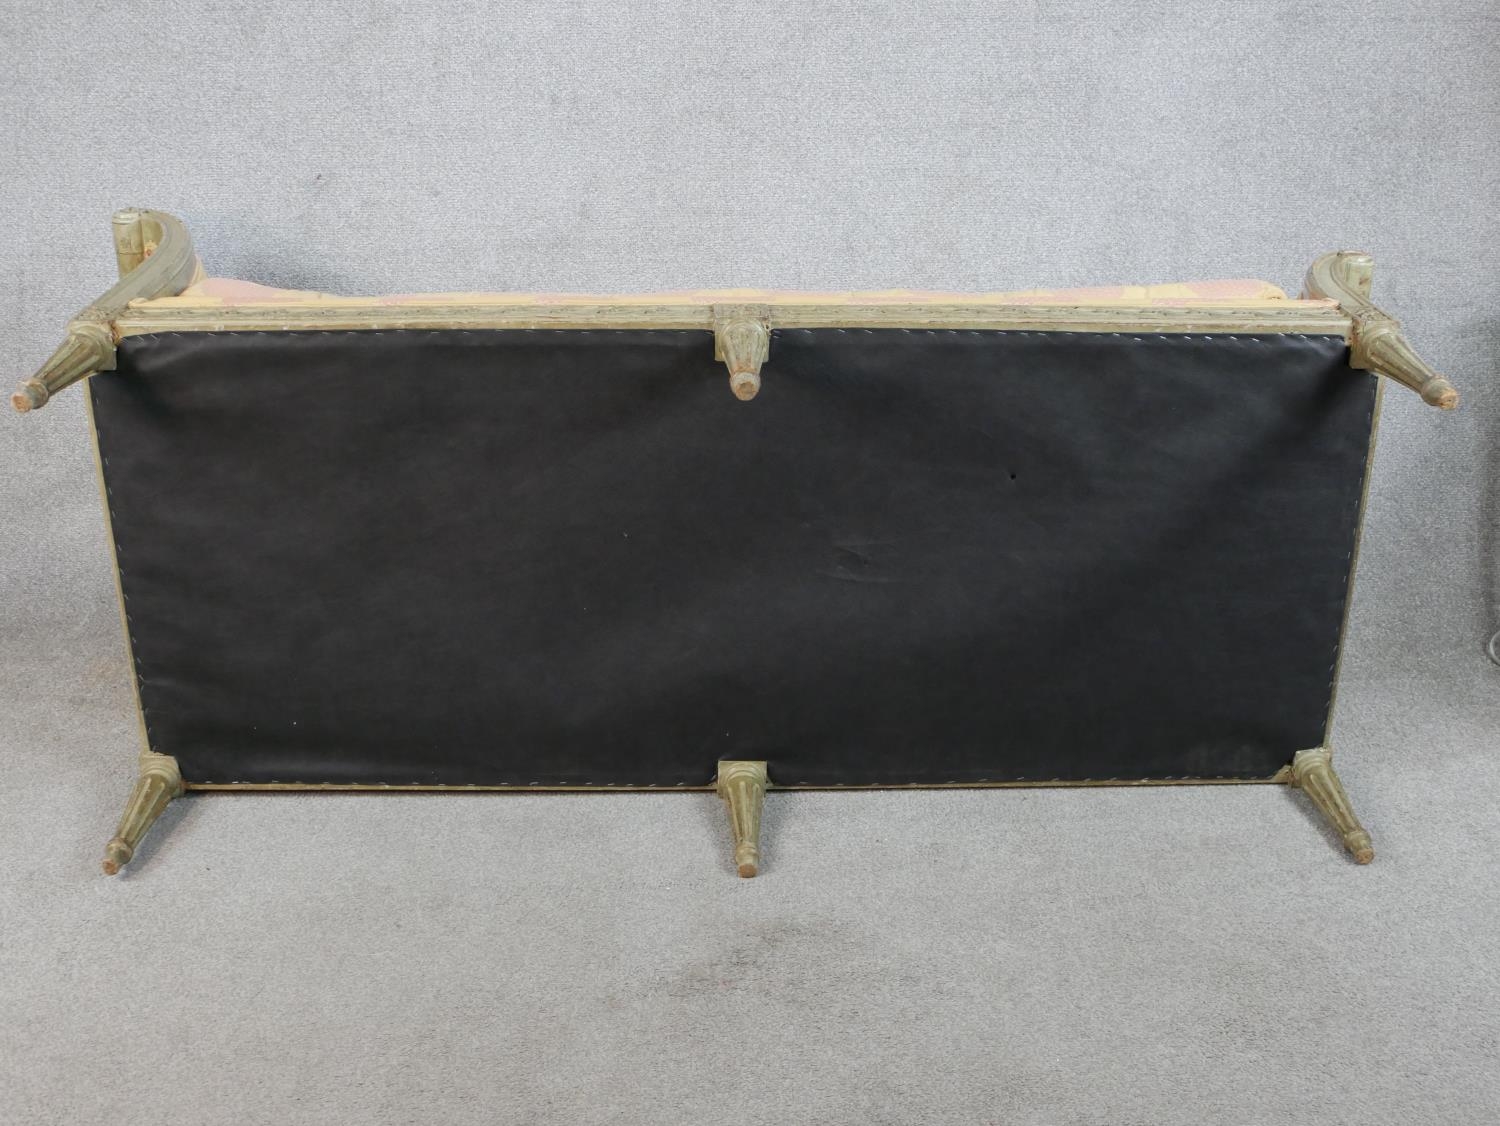 A 20th century Italian painted wooden framed daybed/child's bench with upholstered loose cushion - Image 7 of 7